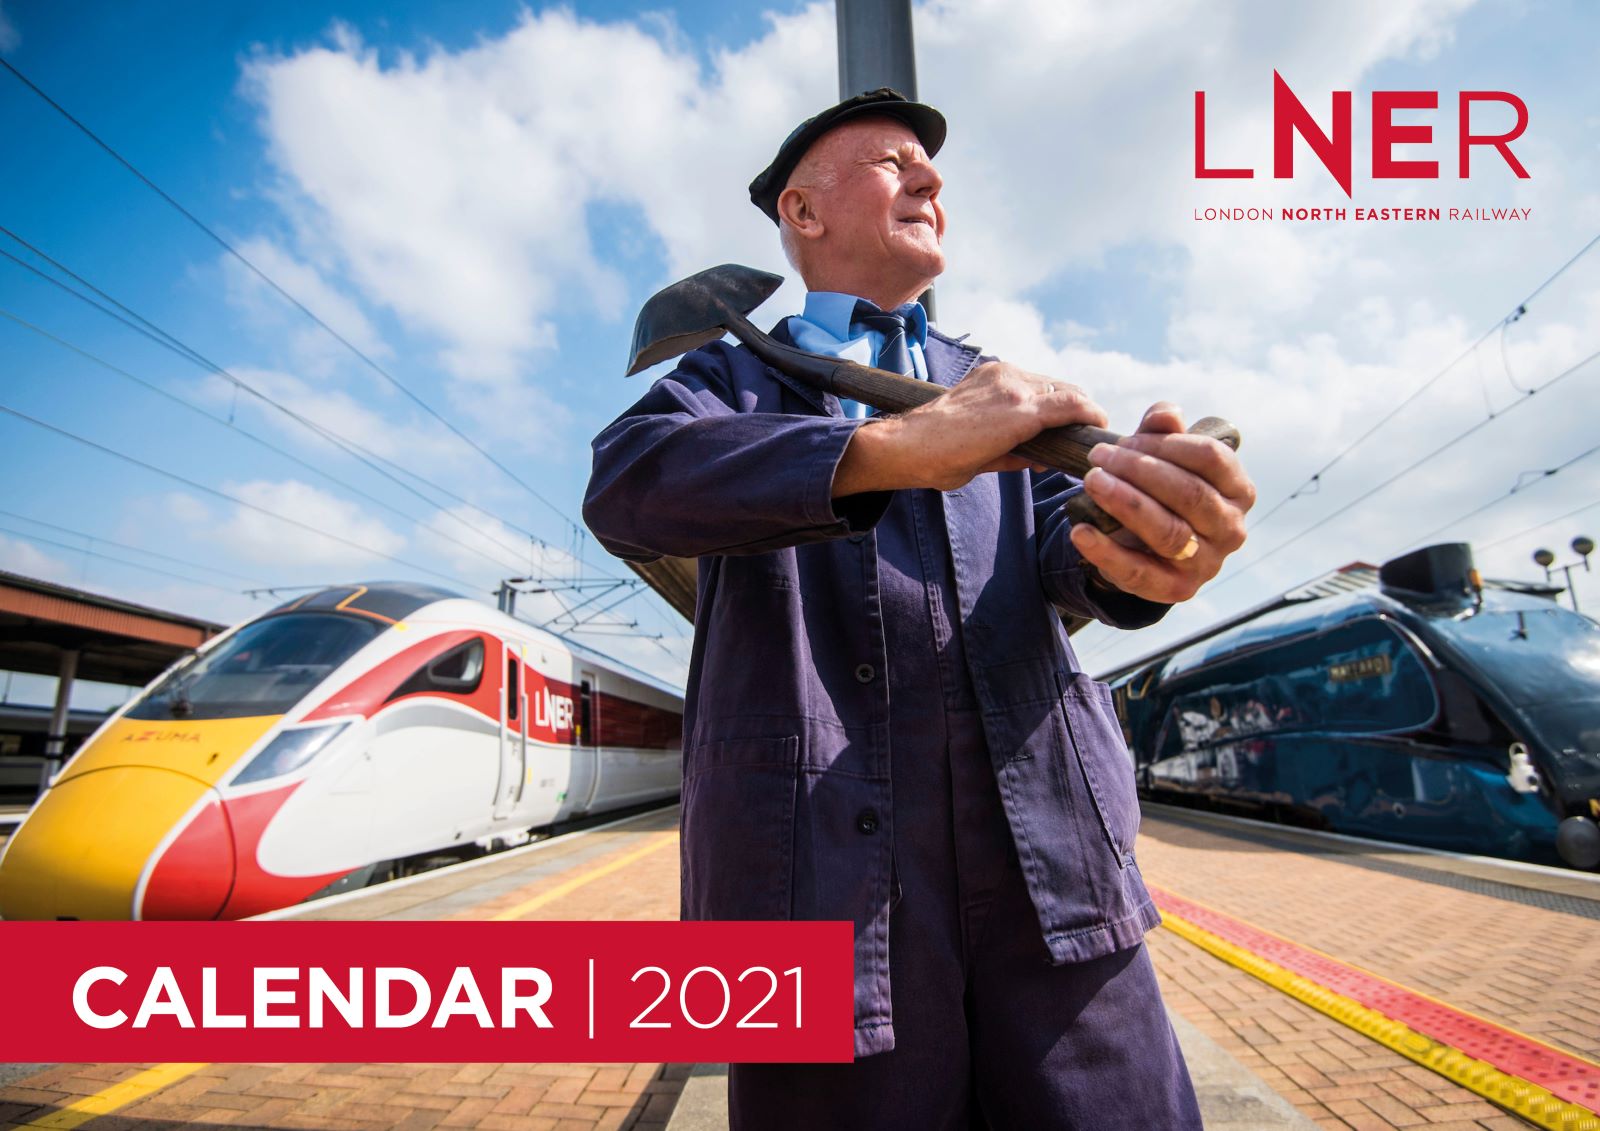 Save the date! LNER launches first calendar celebrating stations and destinations for 2021